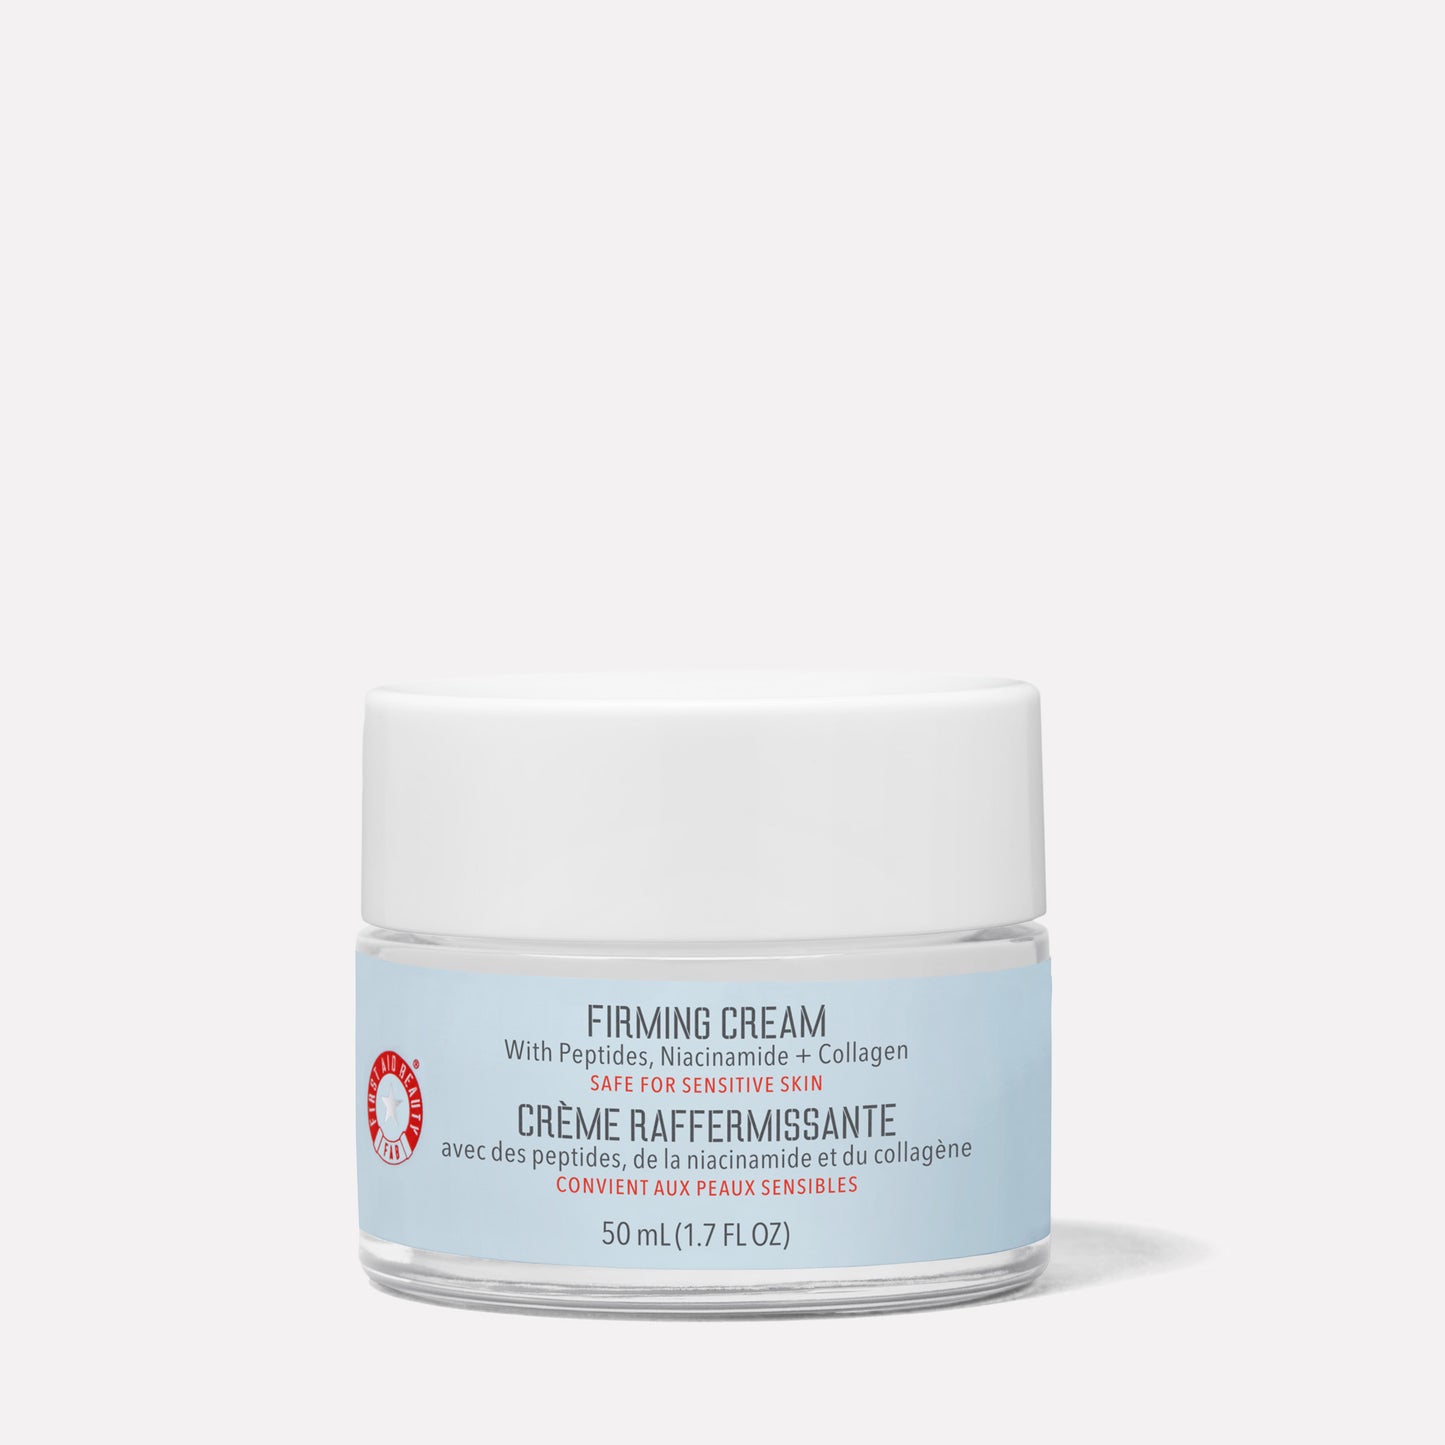 Firming Cream with Peptides, Niacinamide + Collagen 1.7oz.